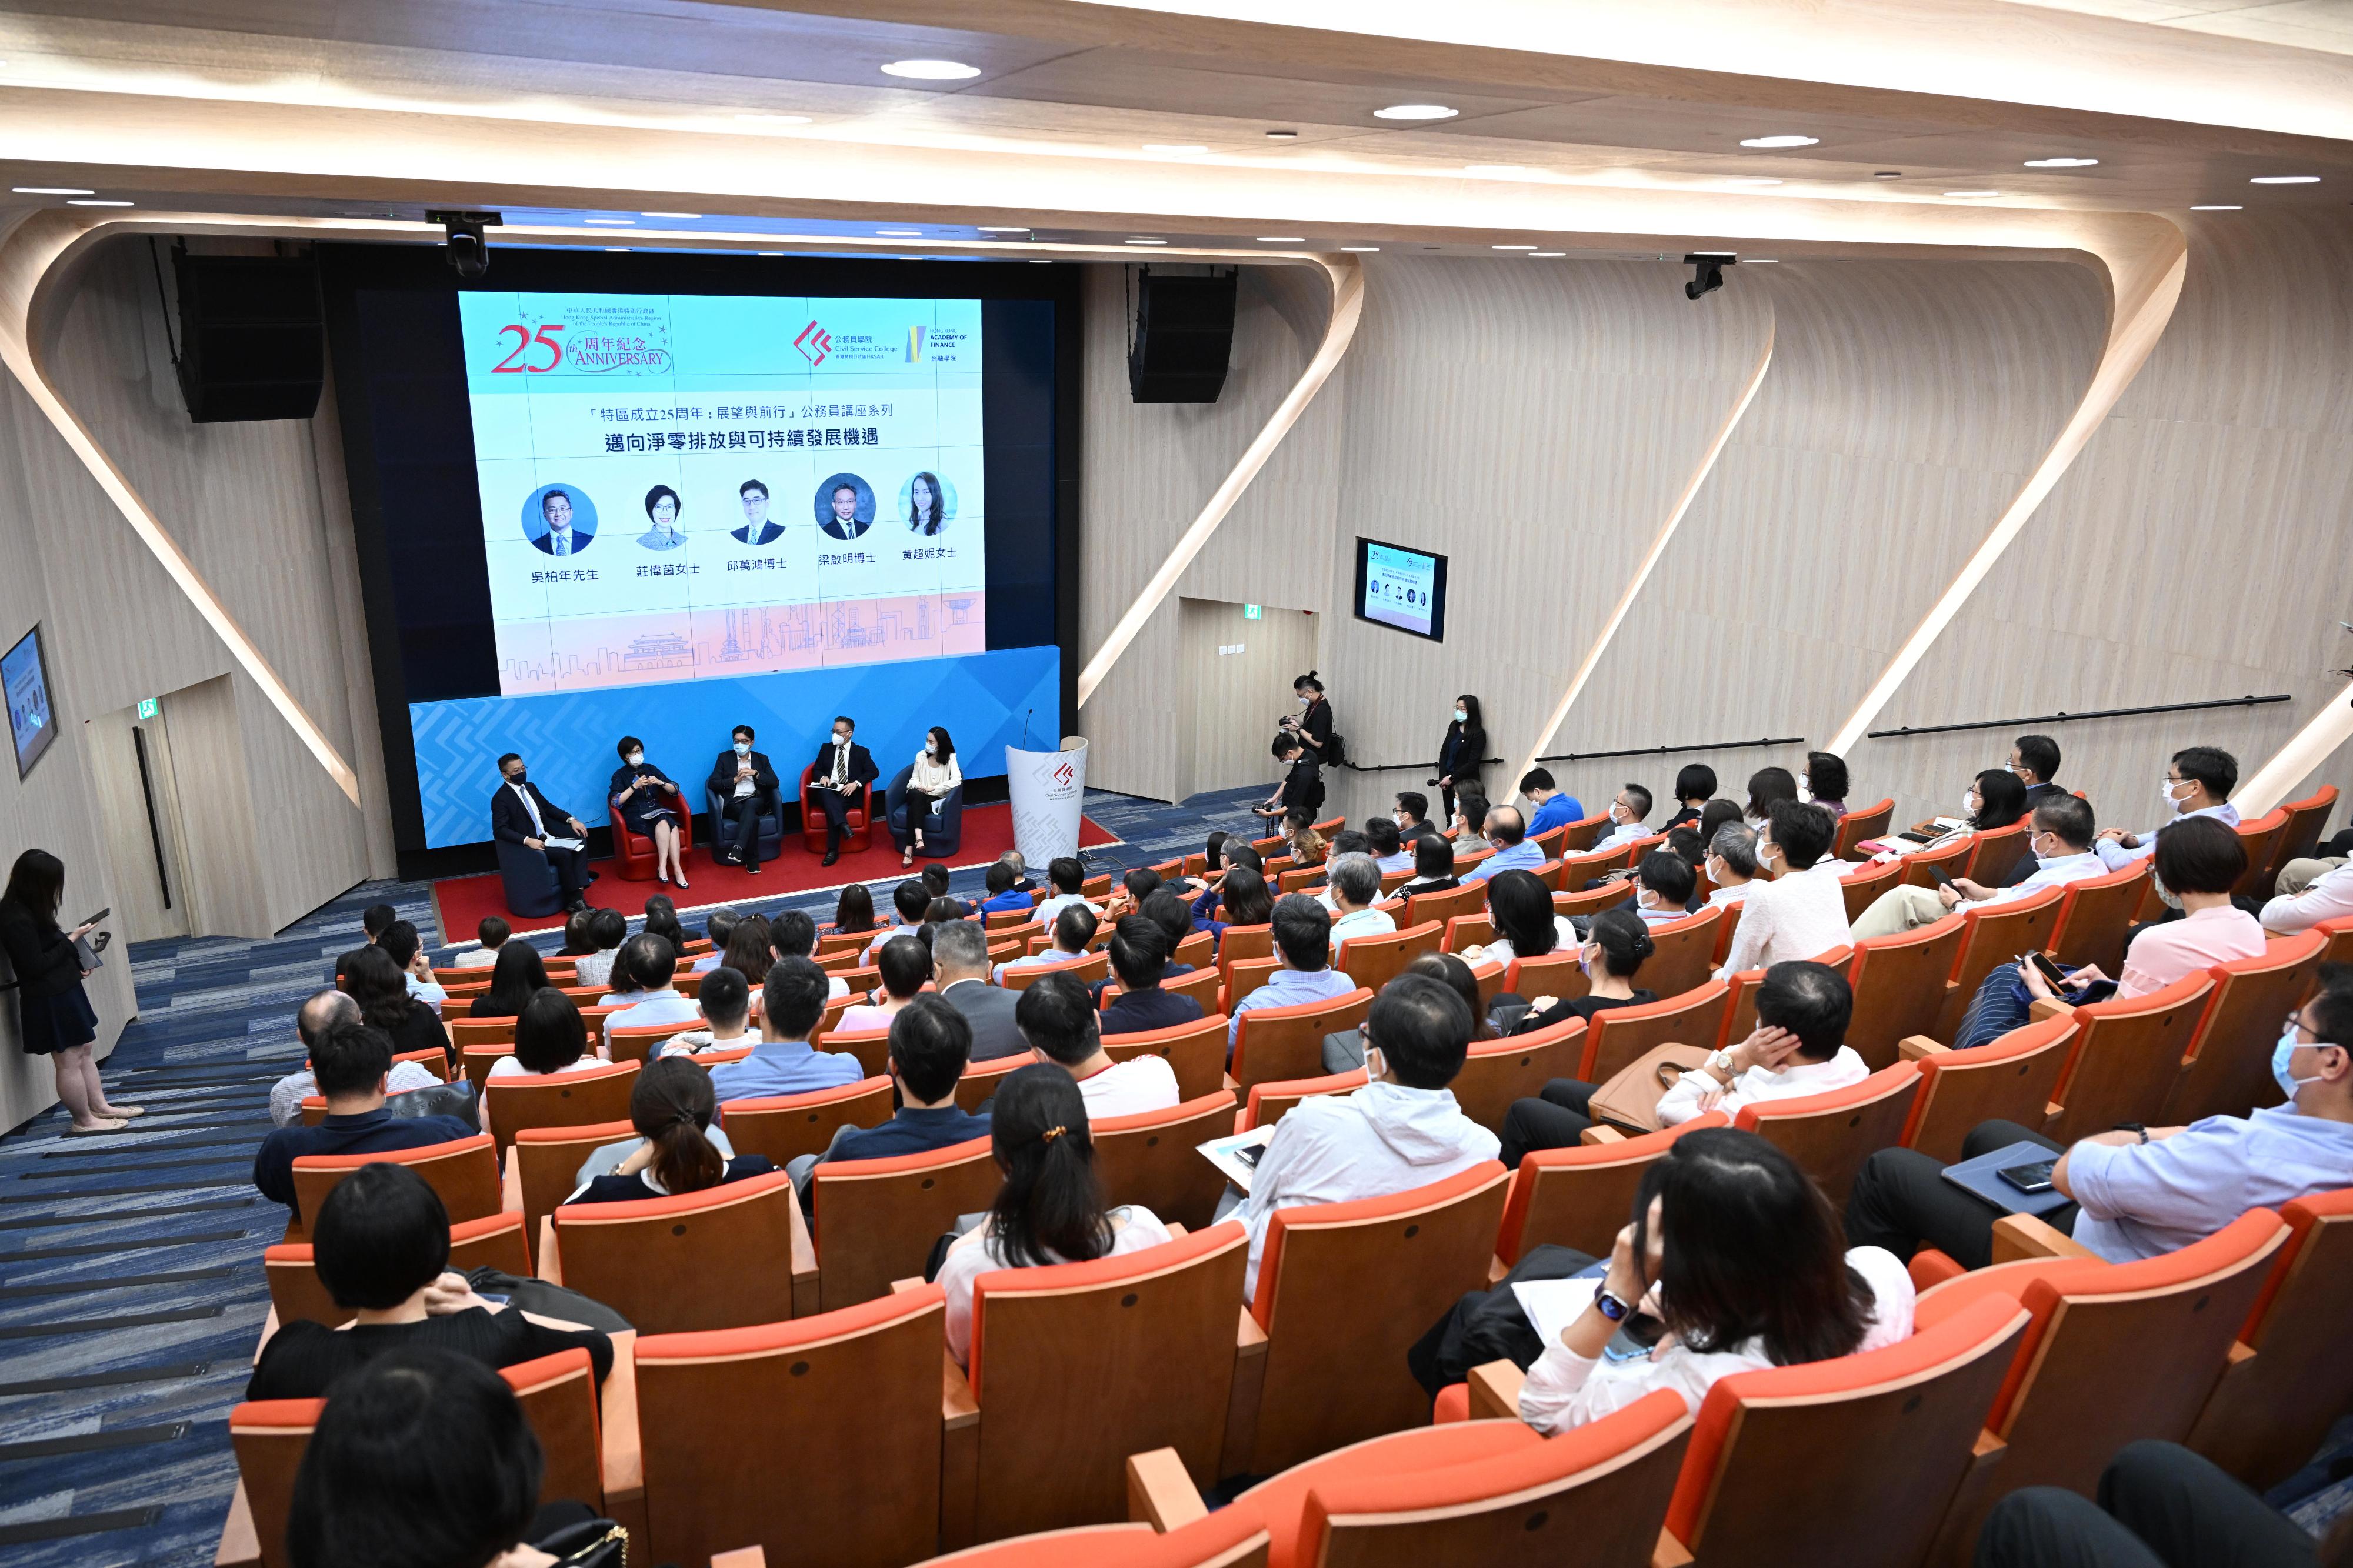 The Civil Service College (the College) launched the "25th Anniversary of the Establishment of the HKSAR: Our Way Forward” seminar series, and held today (July 11) the first seminar with the topic of “Towards Net Zero: Coalition for a Resilient Future” in collaboration with the Hong Kong Academy of Finance. The seminar took place in the College at North Point Government Offices, and was attended by around 90 civil servants at the directorate and senior ranks.